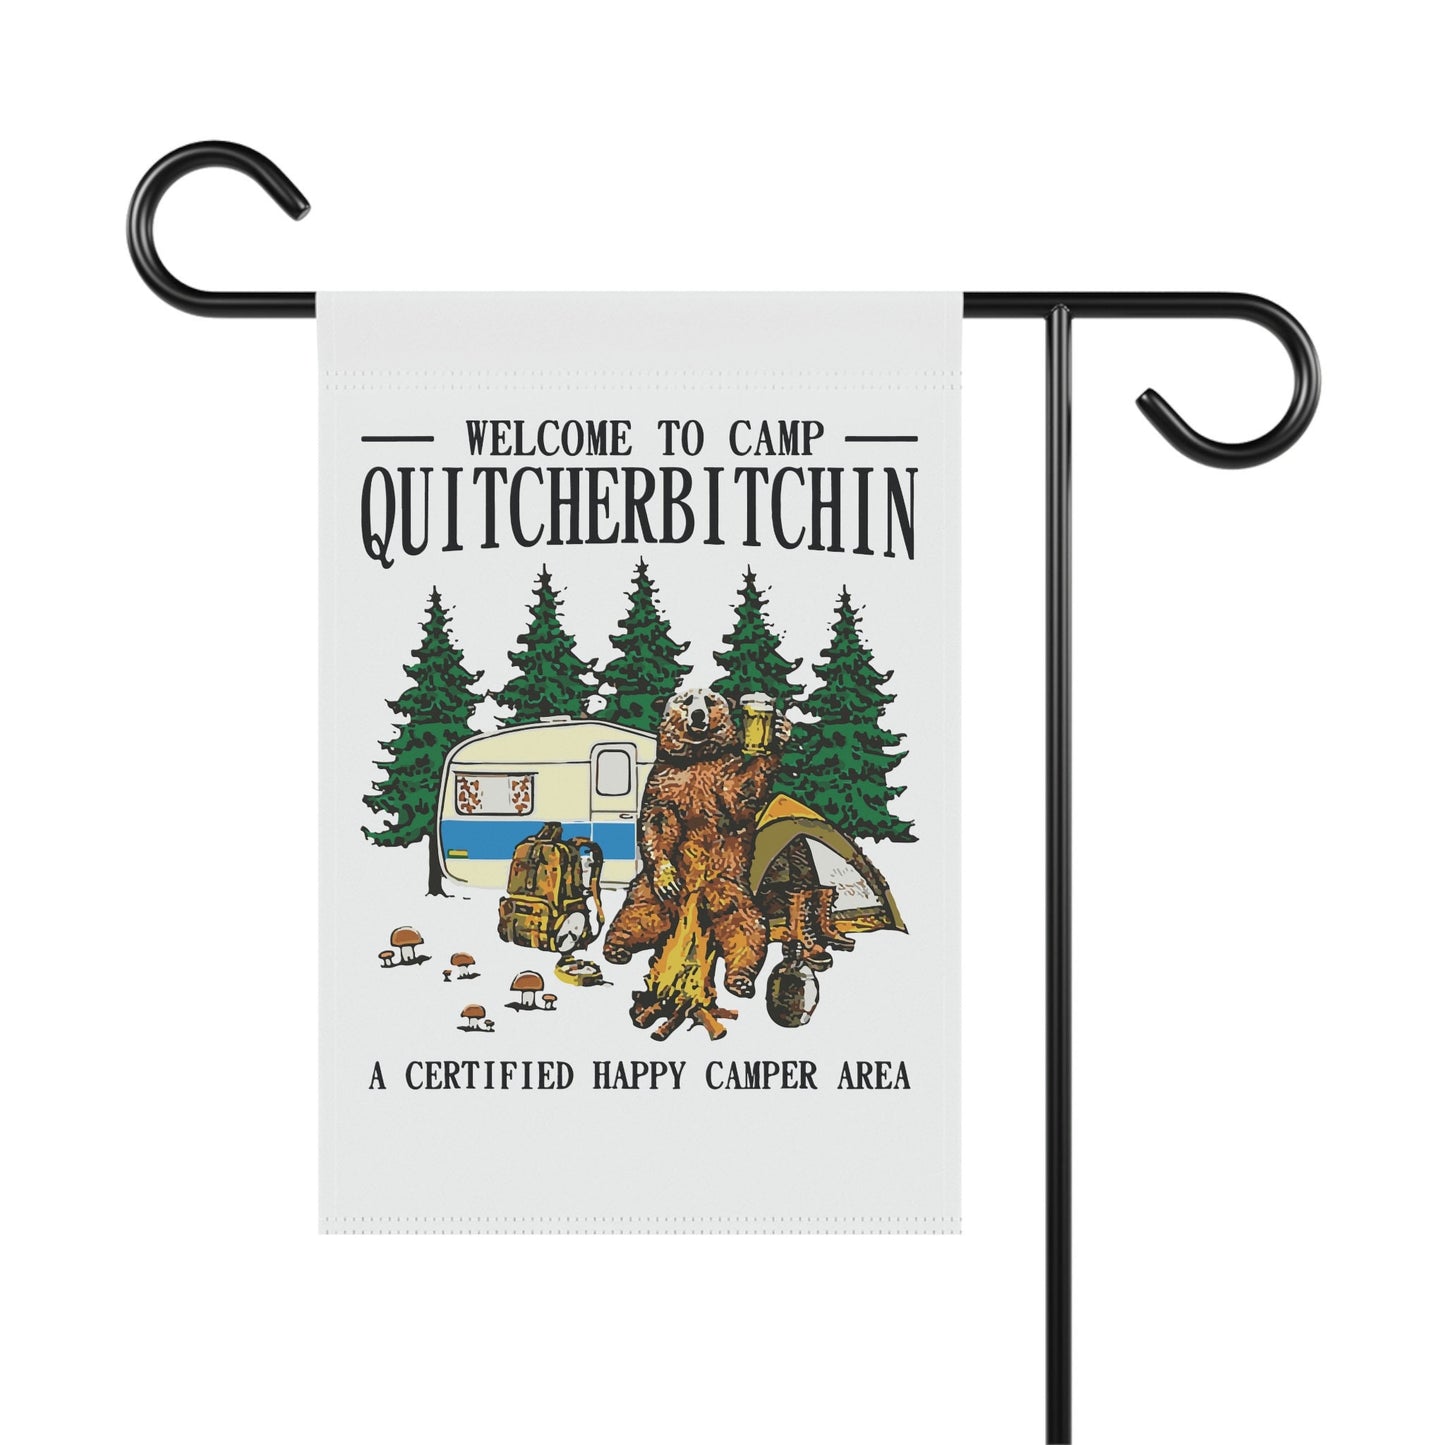 Welcome to Camp Quitcherbitchin Camping, Garden and House flag (excludes pole)